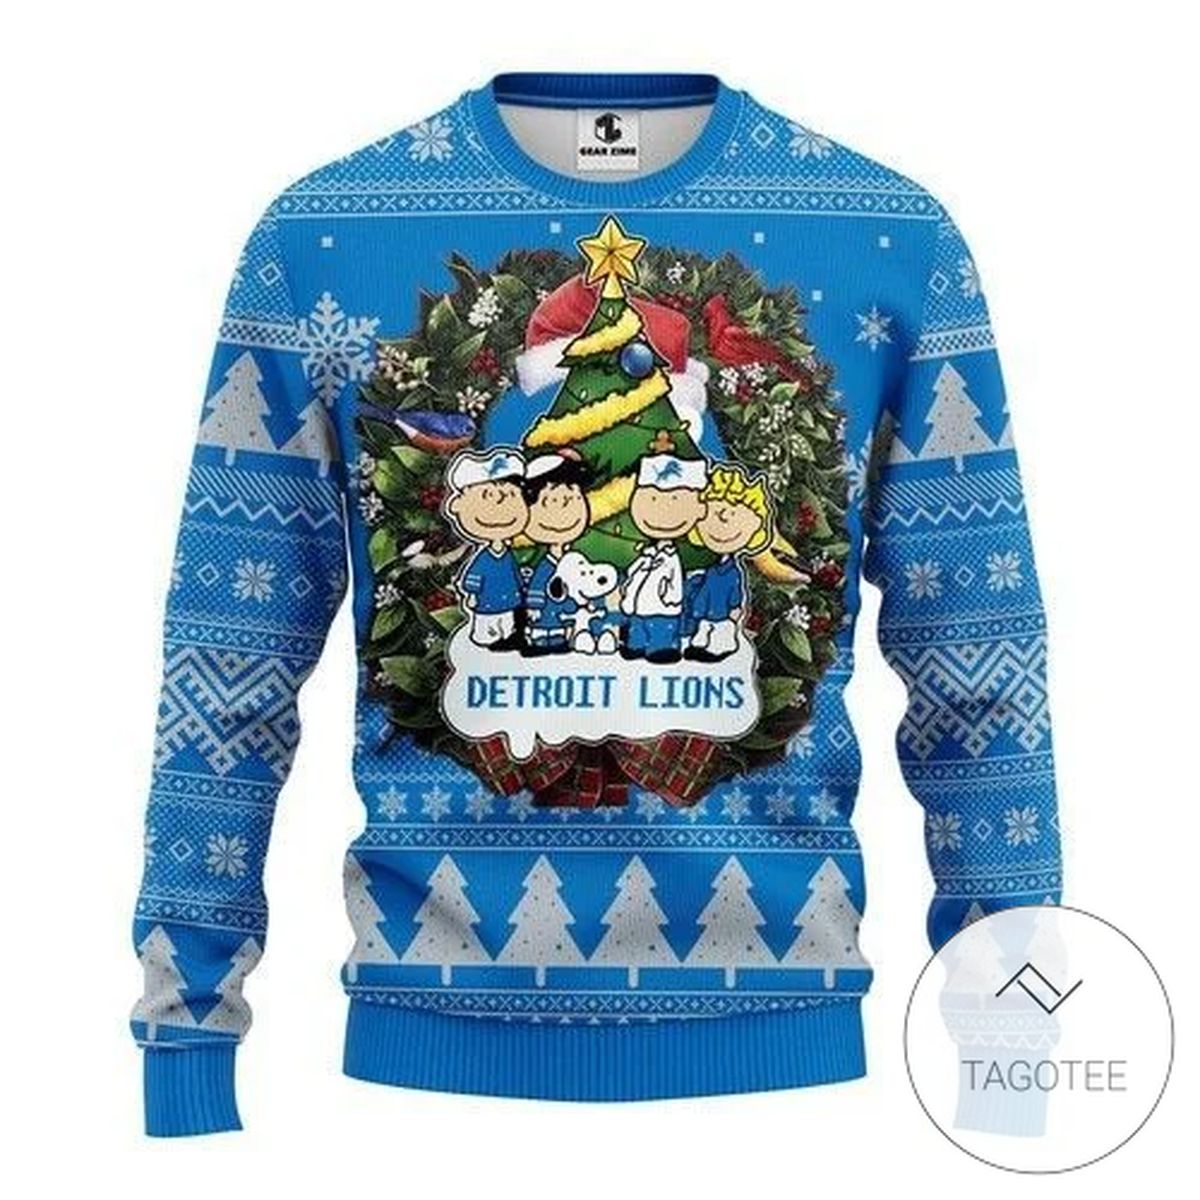 Detroit Lions Sweatshirt Knitted Ugly Christmas Sweater